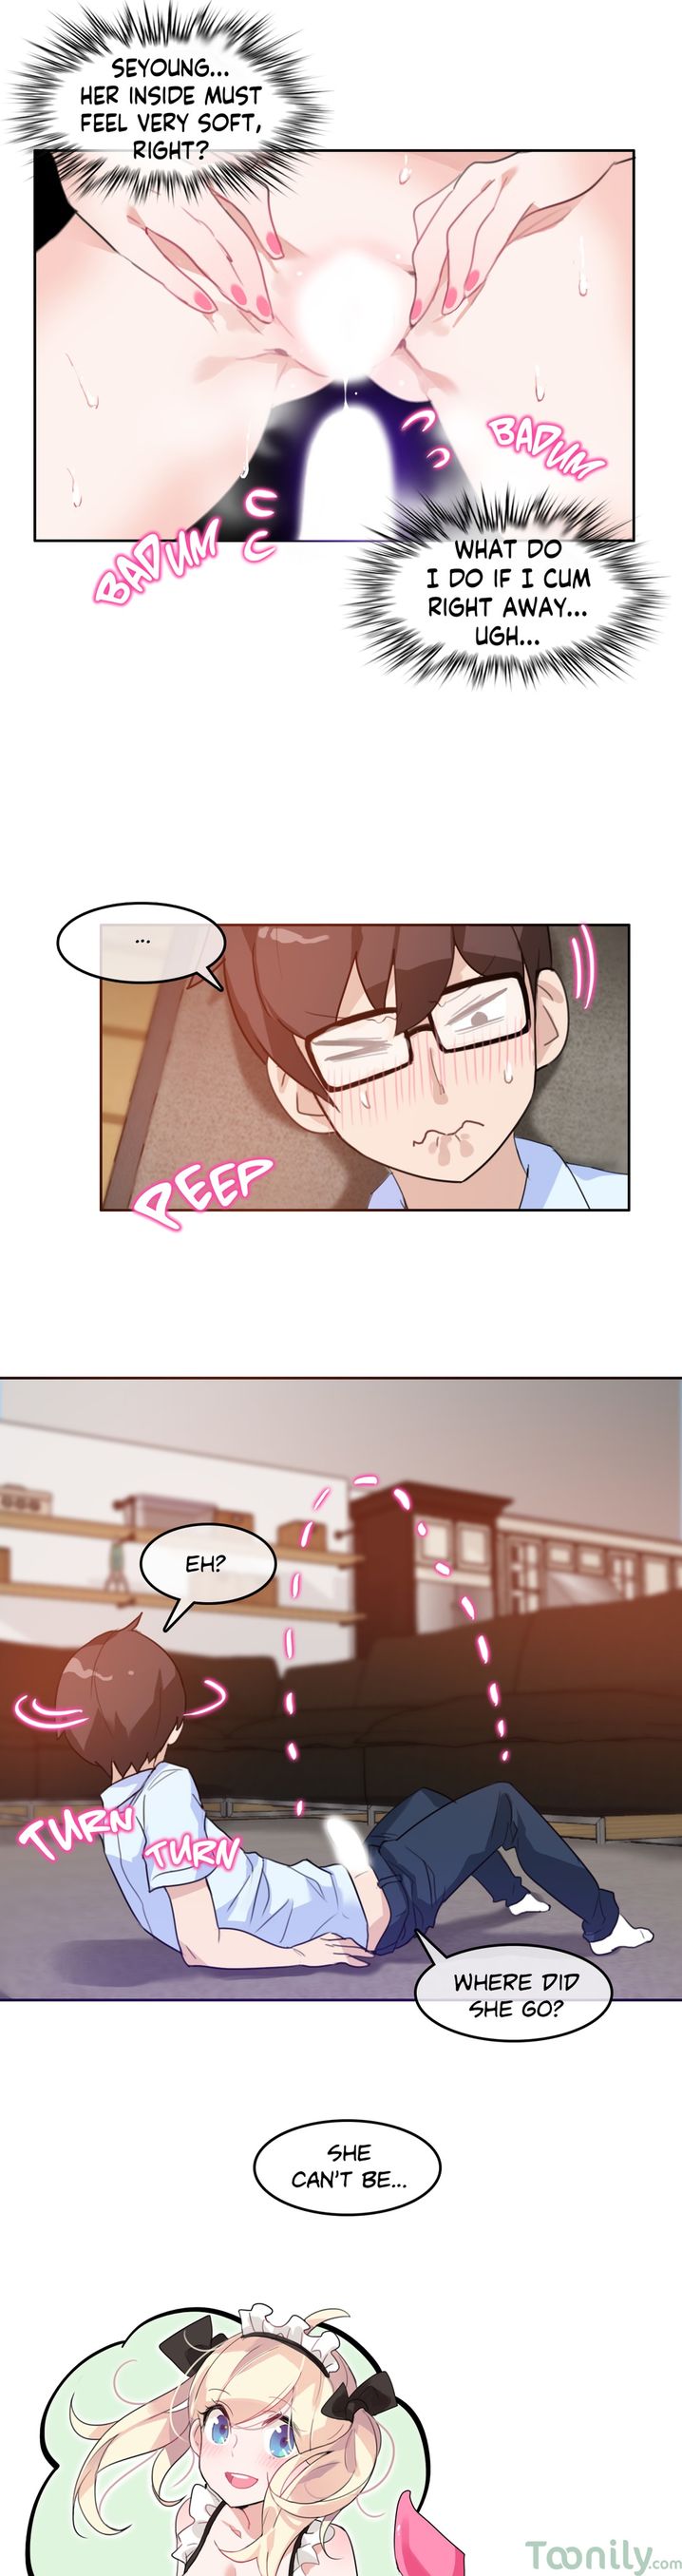 A Pervert’s Daily Life - Chapter 11 Page 9